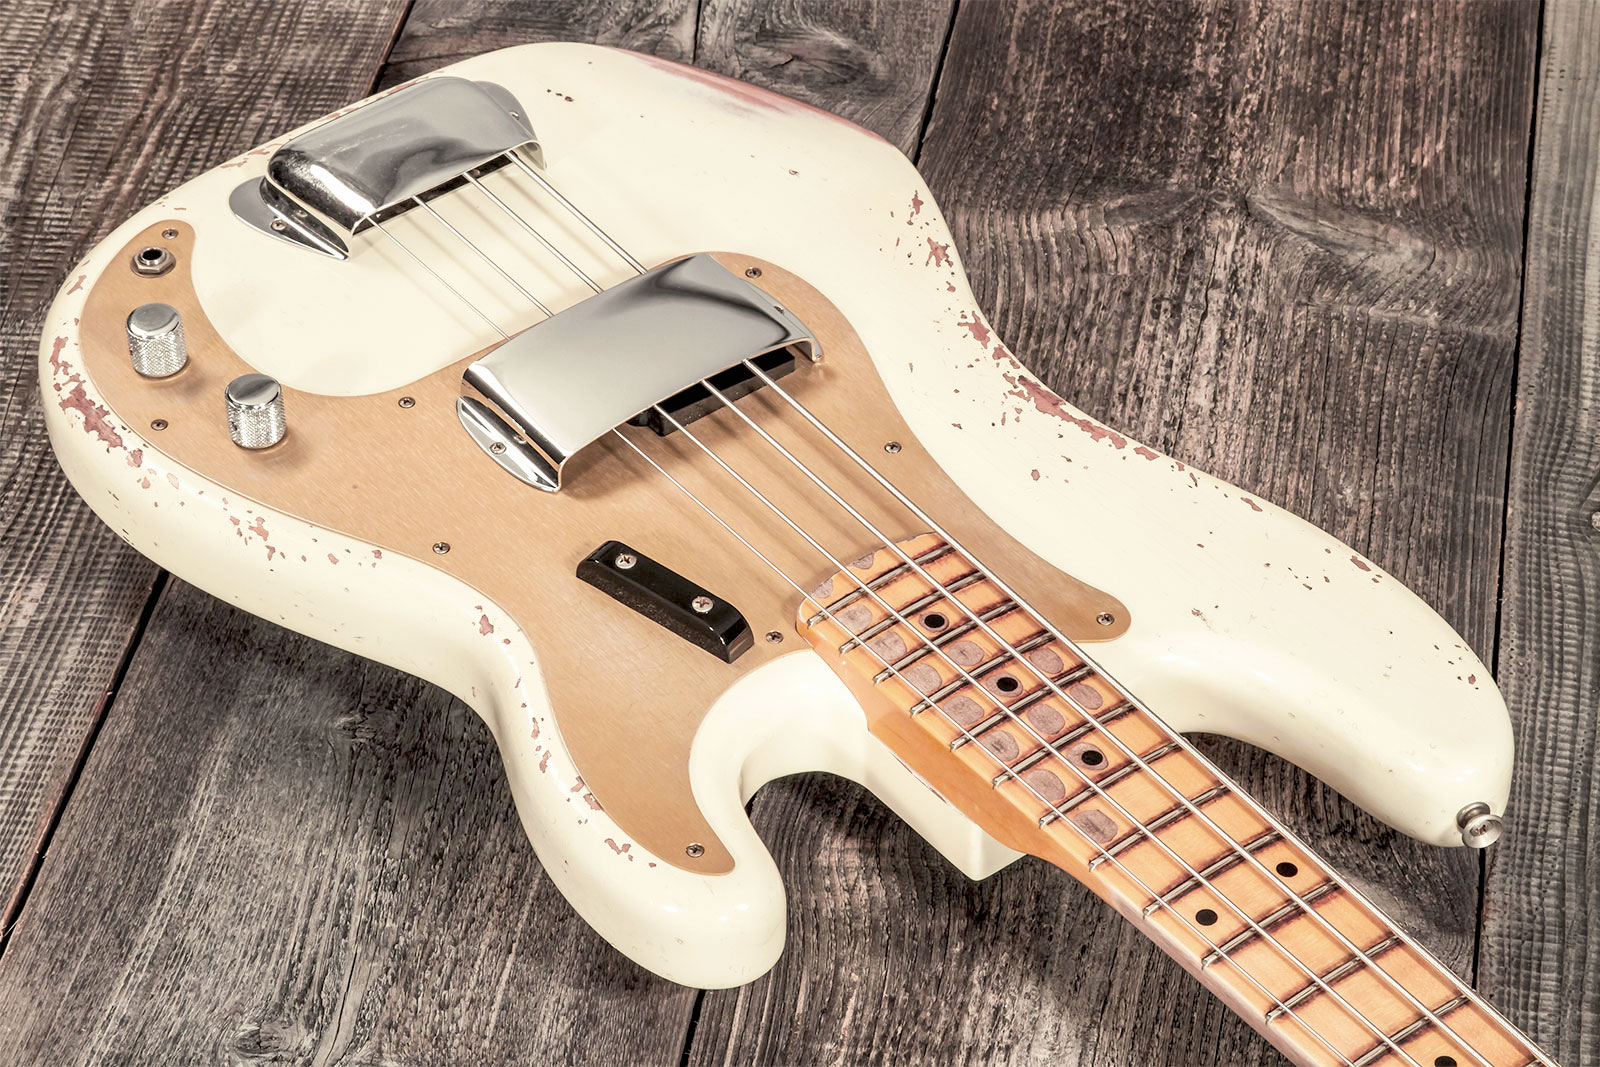 Fender Custom Shop Precision Bass 1958 Mn #cz569181 - Heavy Relic Vintage White - Solid body electric bass - Variation 2